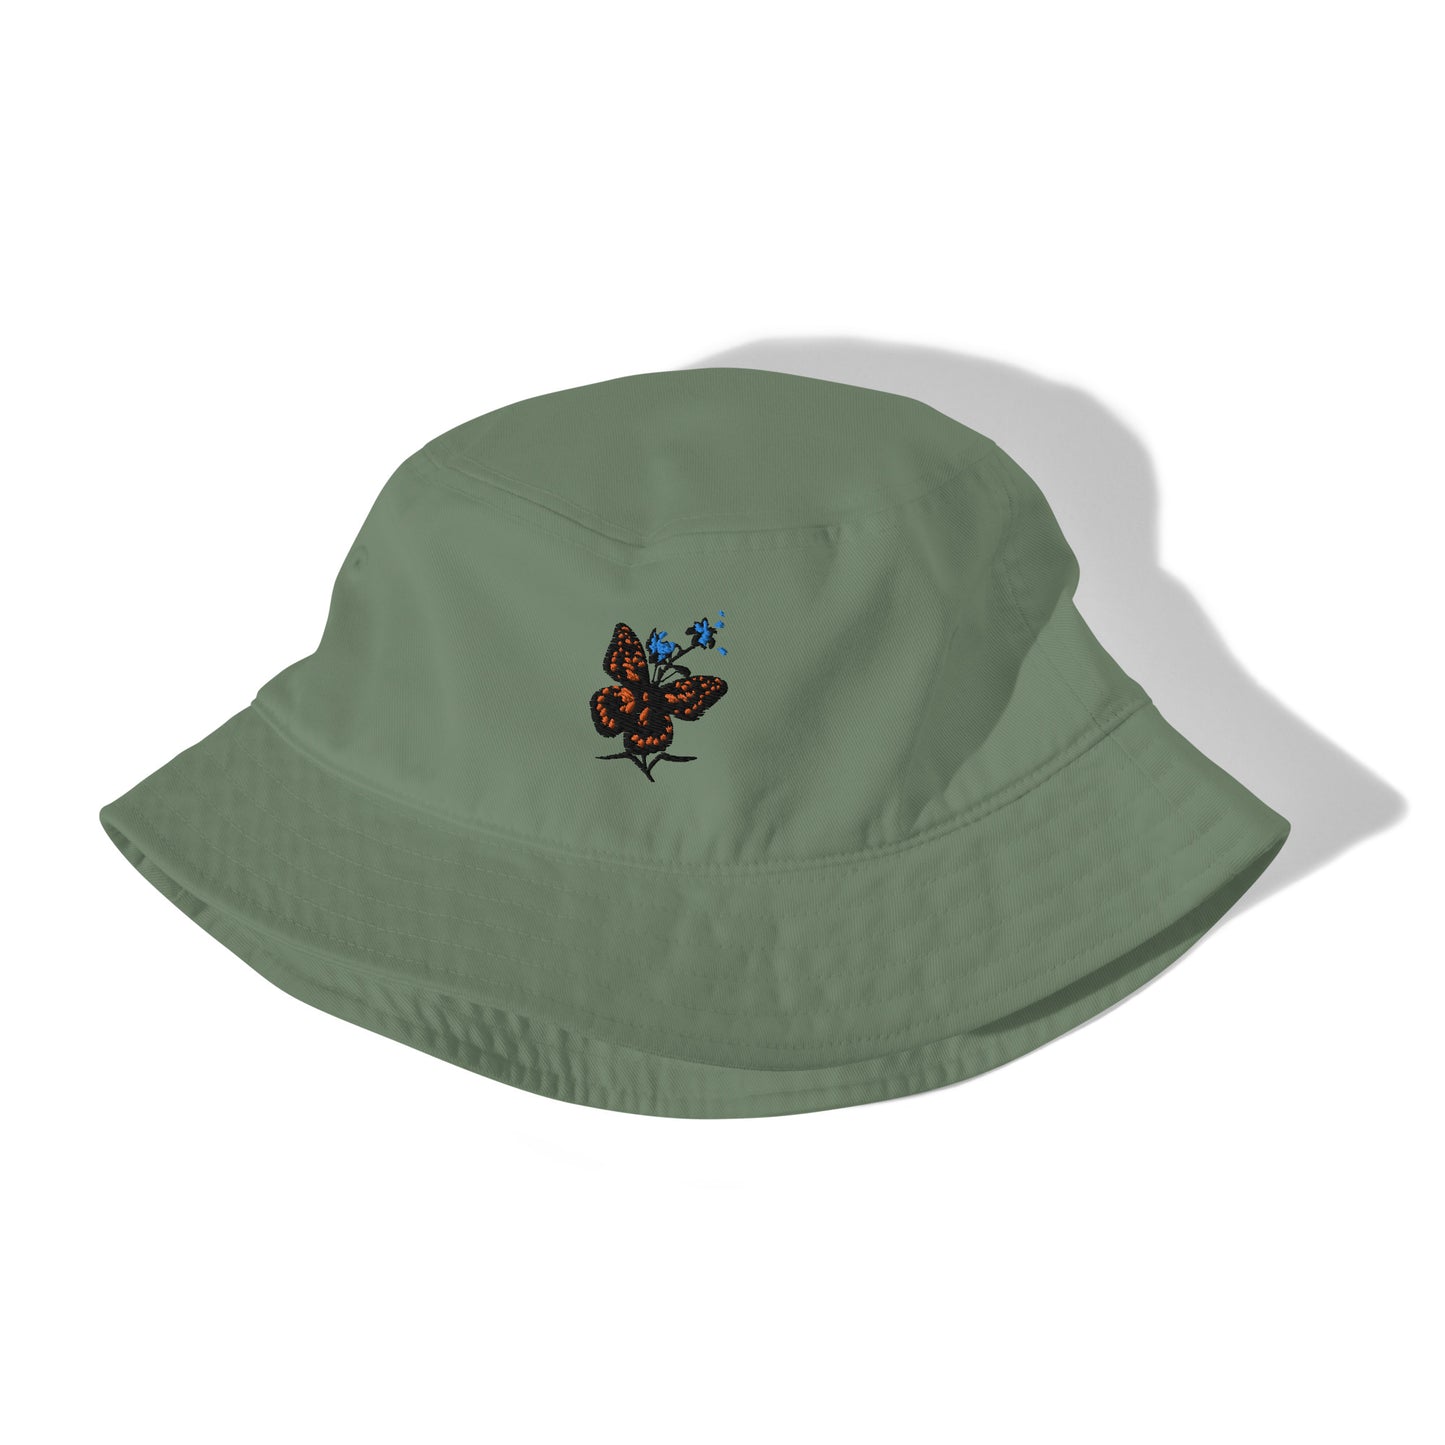 Butterfly and Flowers Organic Cotton Bucket Hat